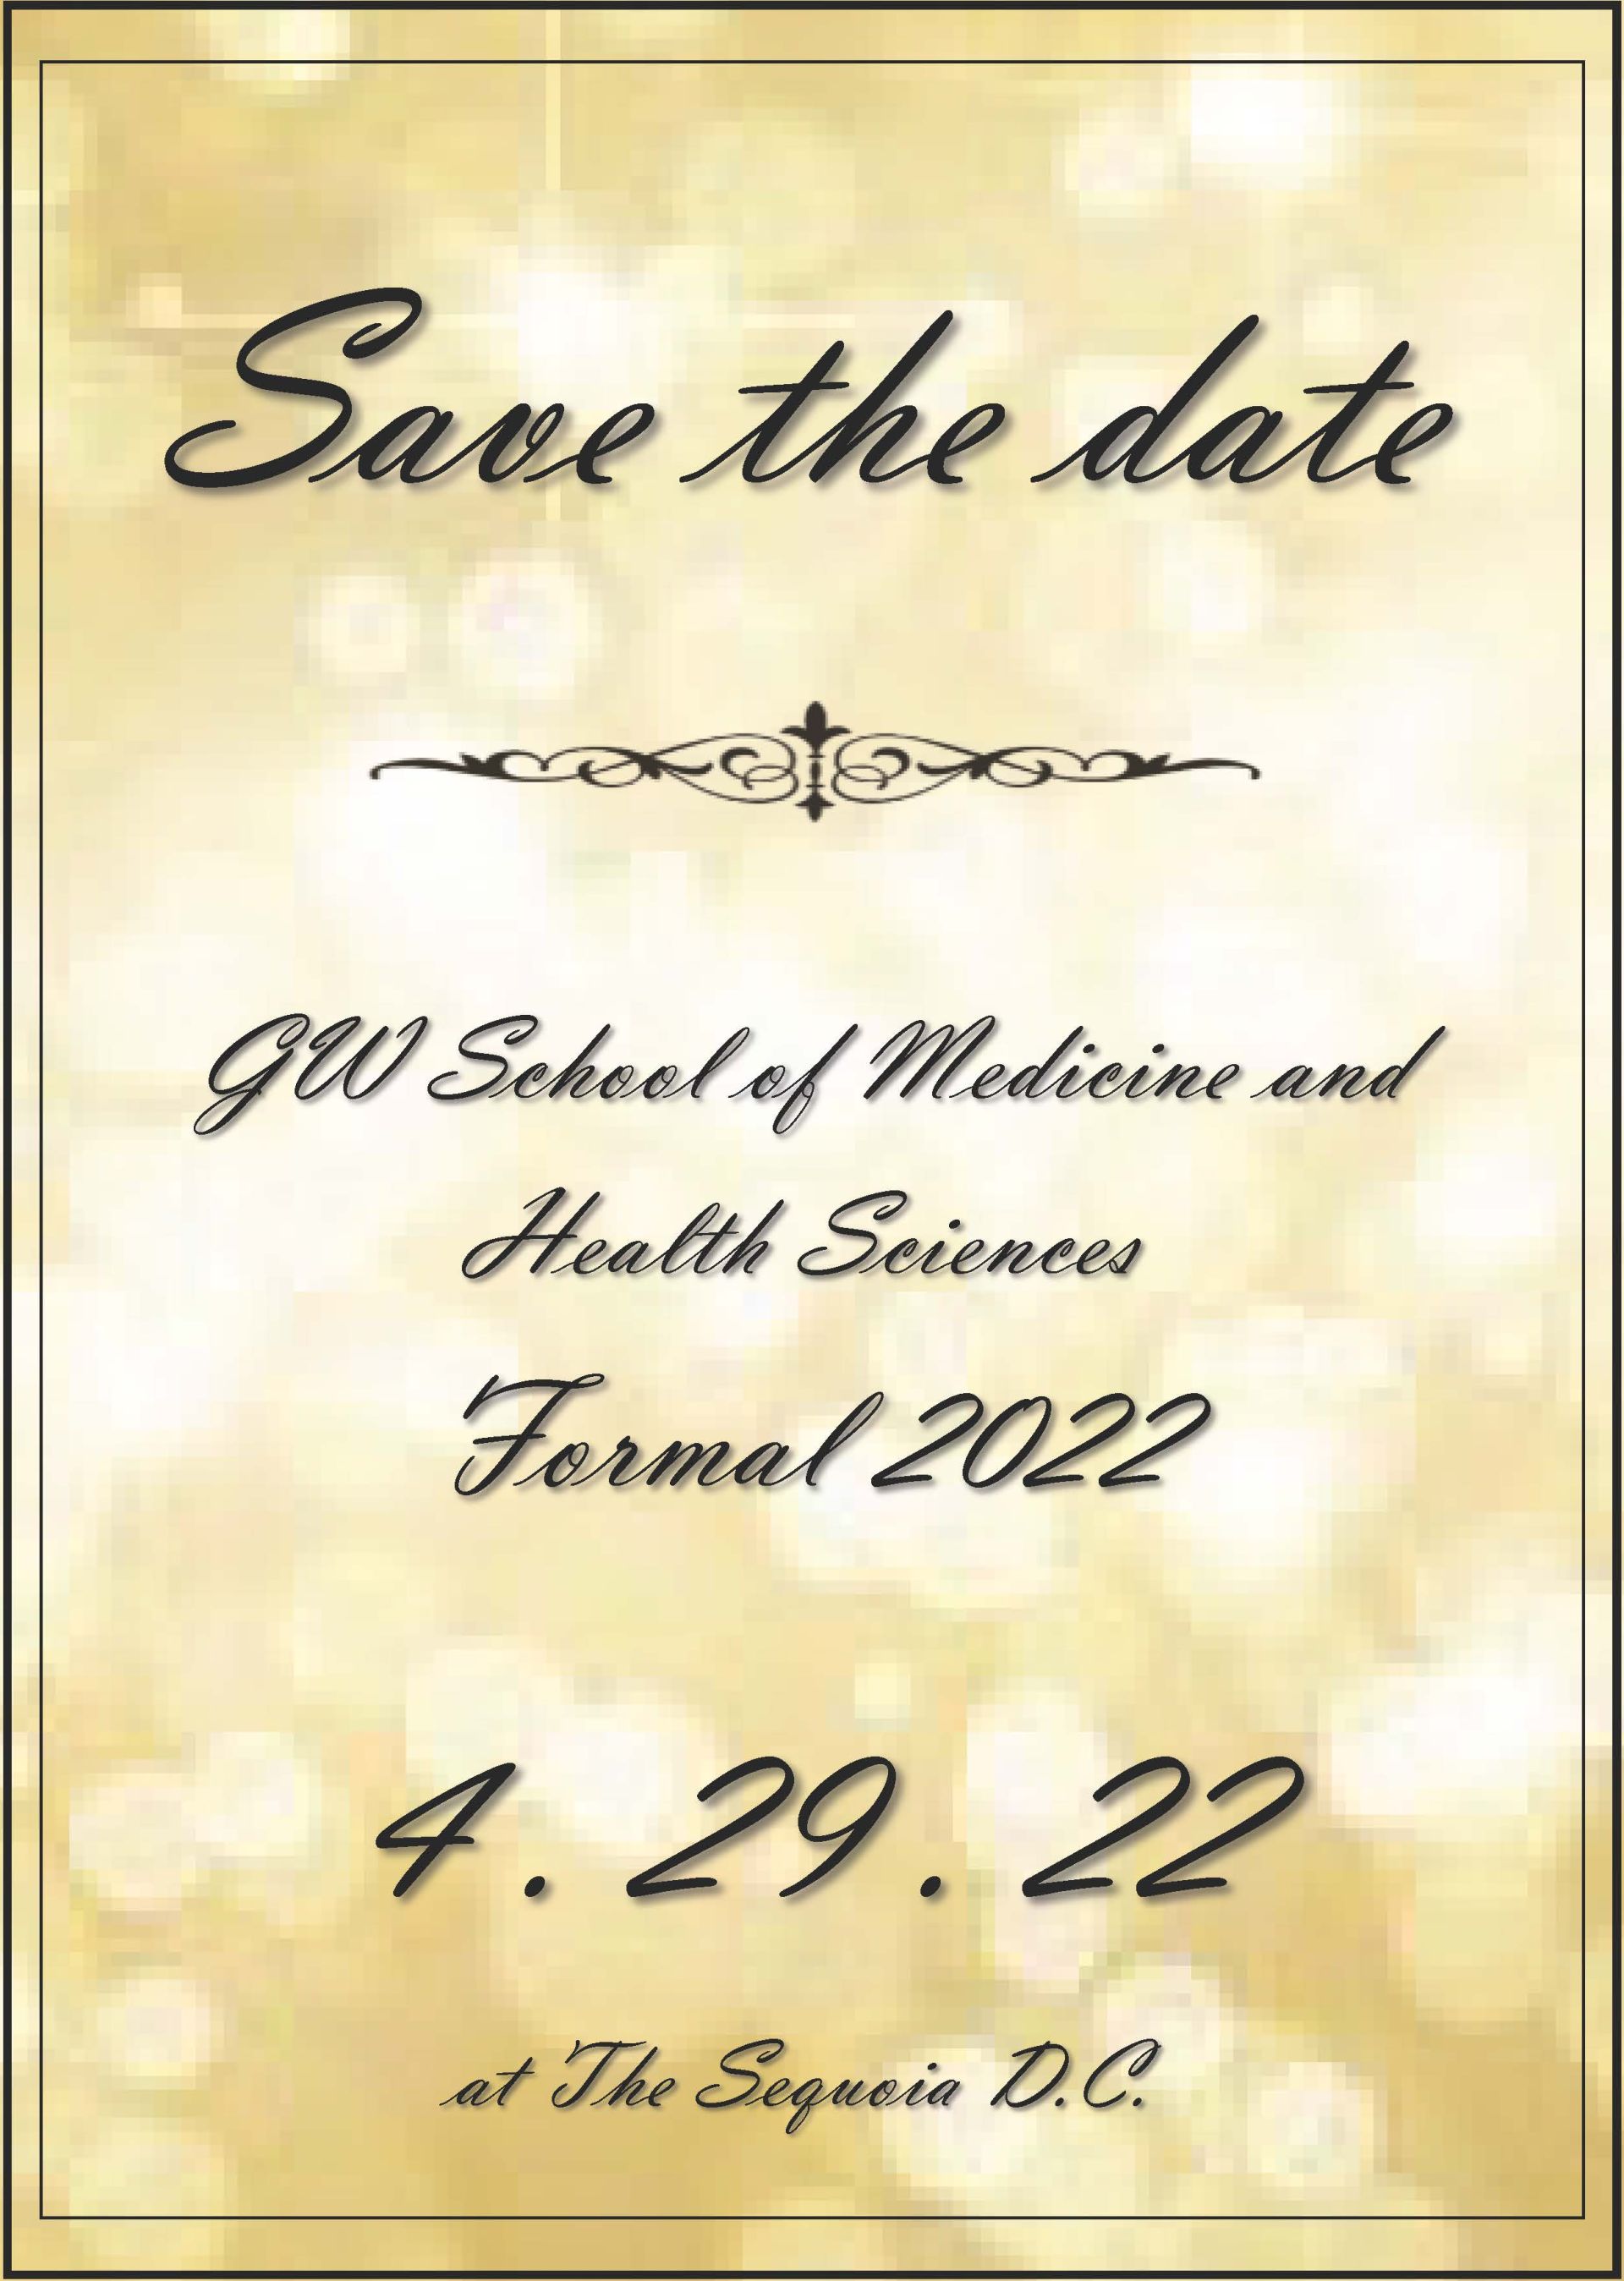 Save the Date GWU Formal 2022, April 29, 2022